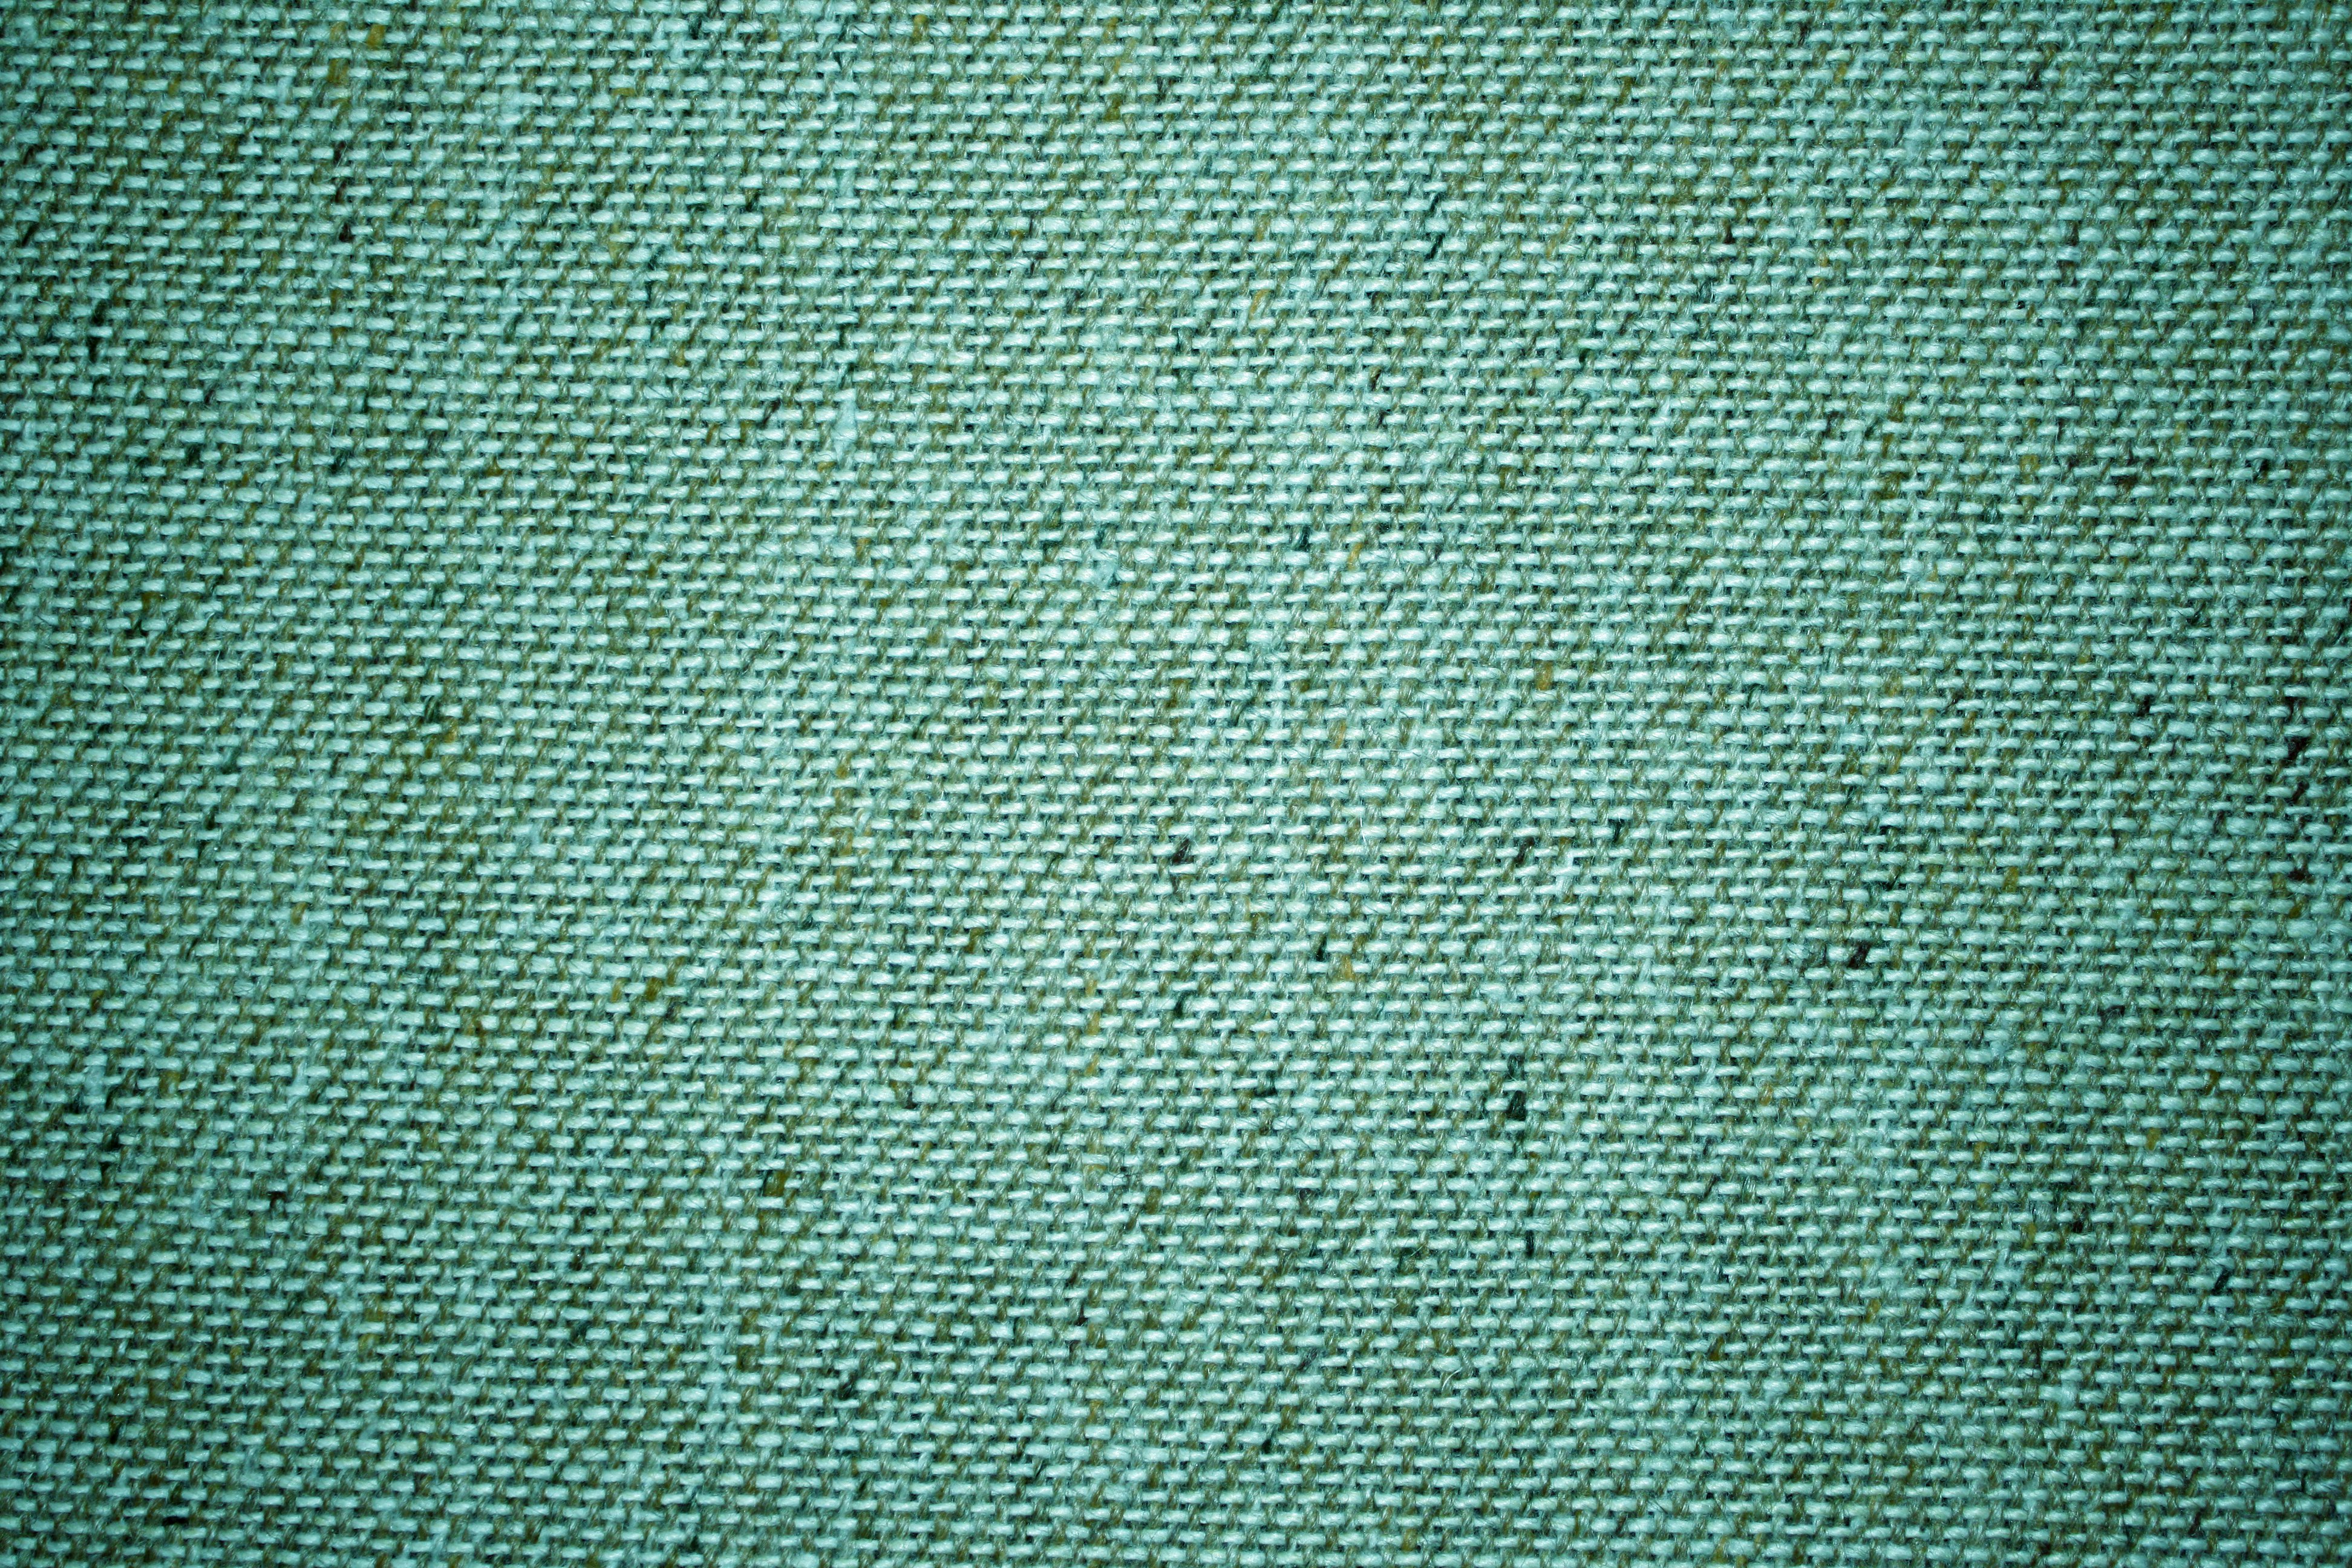 Teal Green Upholstery Fabric Close Up Texture High Resolution